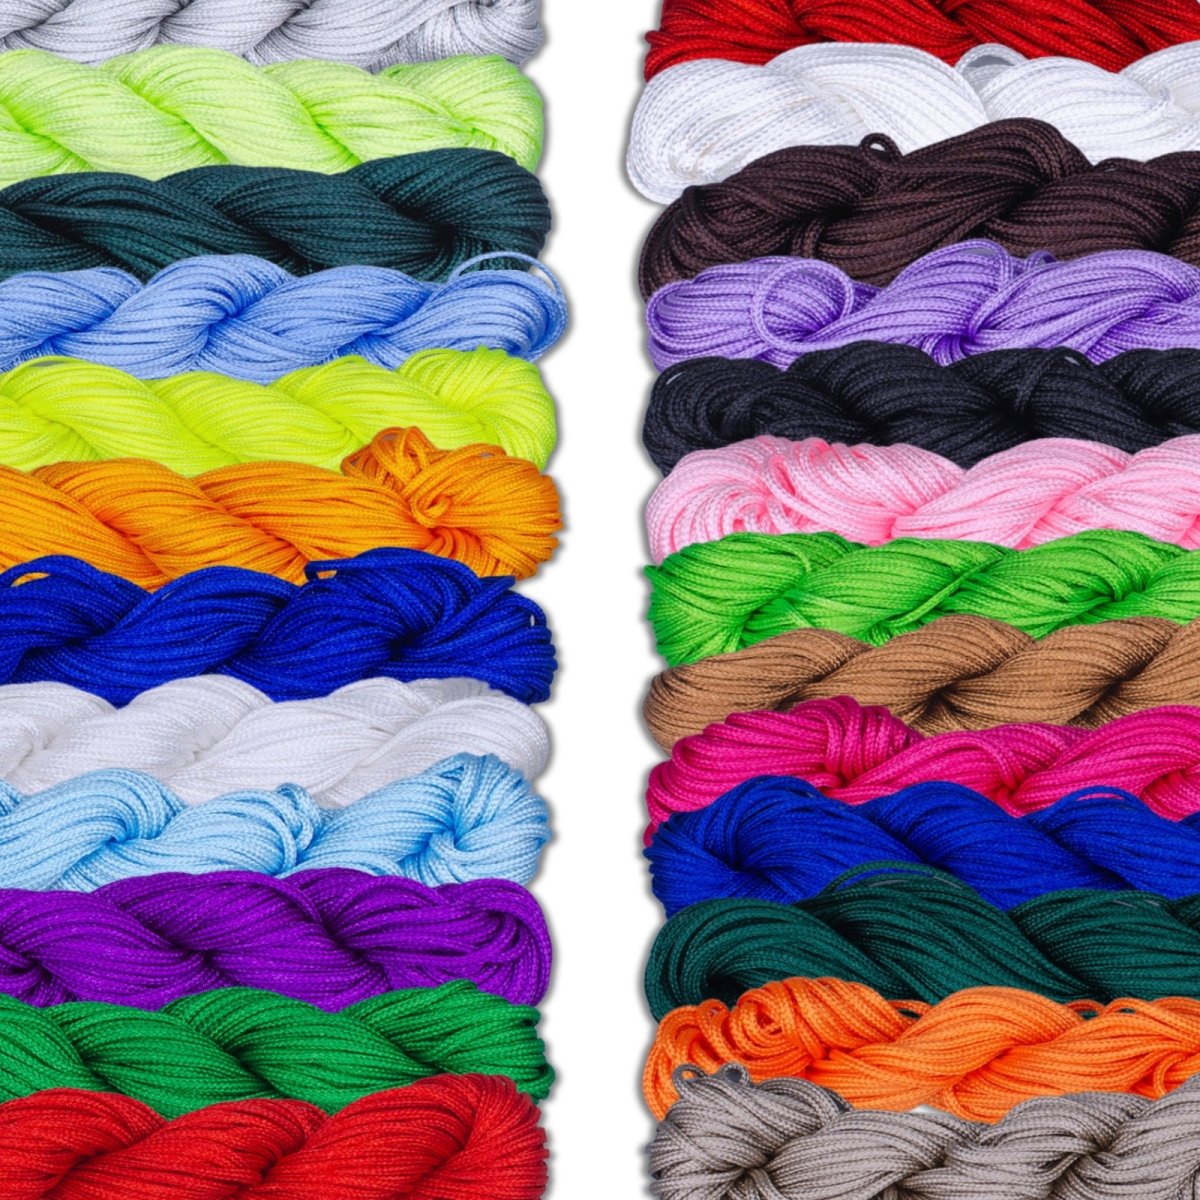 1.5mm Chinese Knotting Cord Nylon Cord Knot Thread for Necklace Bracelet Anklet Cord Beads String for Jewelry Making Supply 10 meter - DLUXCA